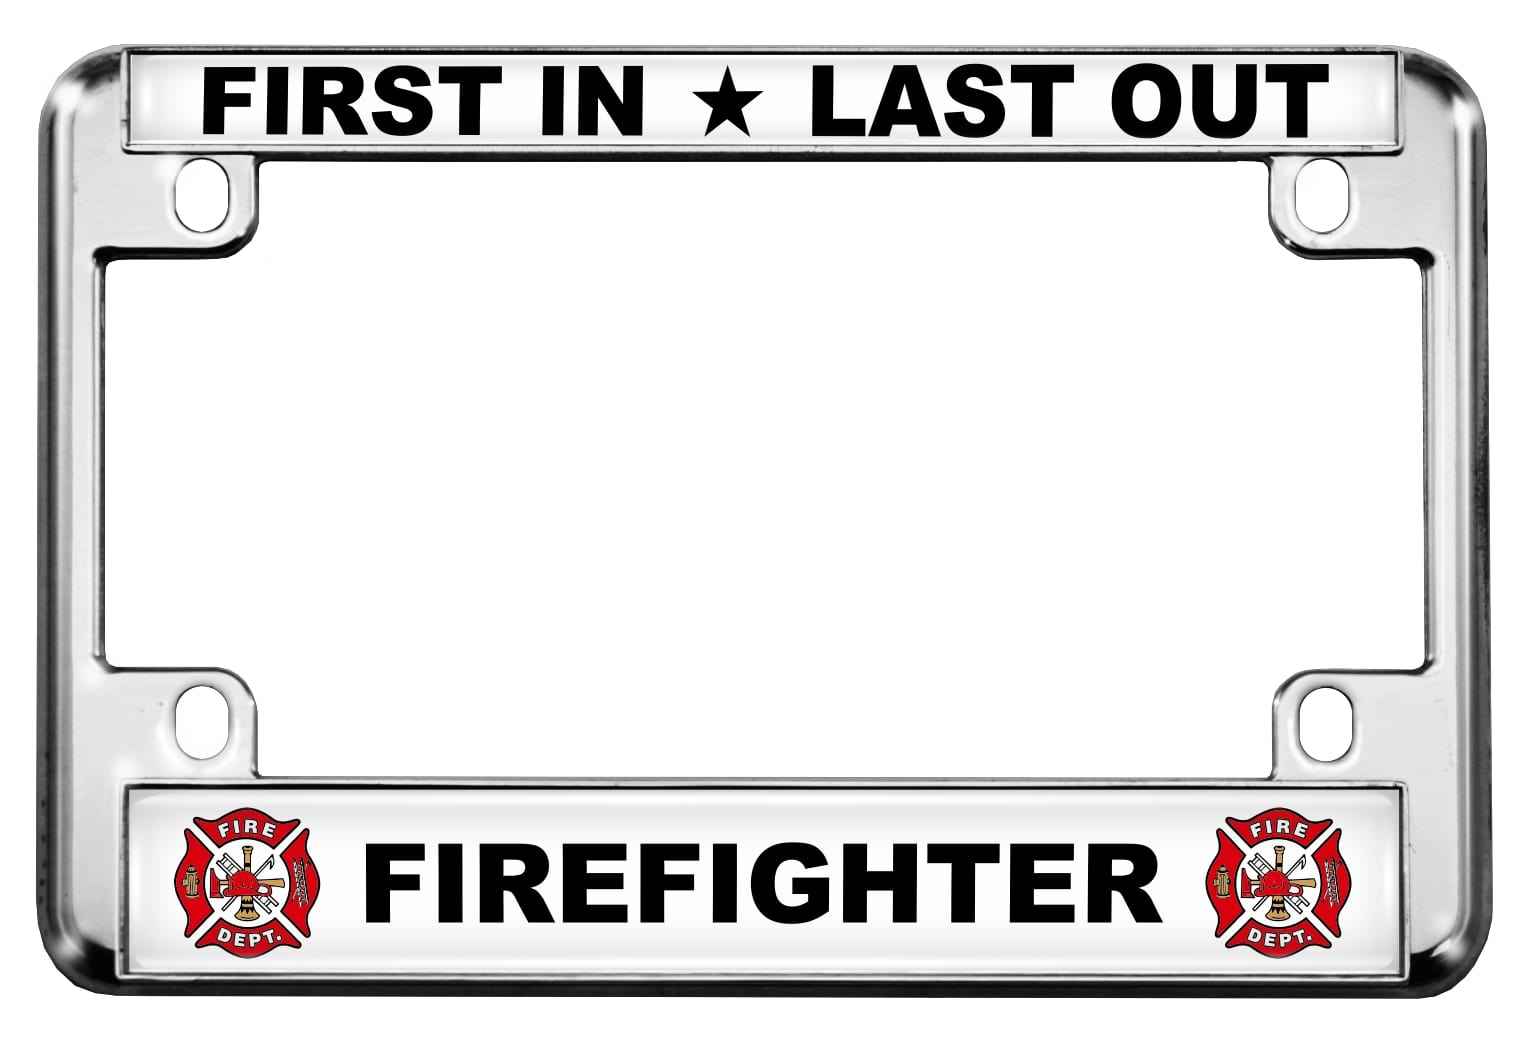 Firefighter - Motorcycle Metal License Plate Frame